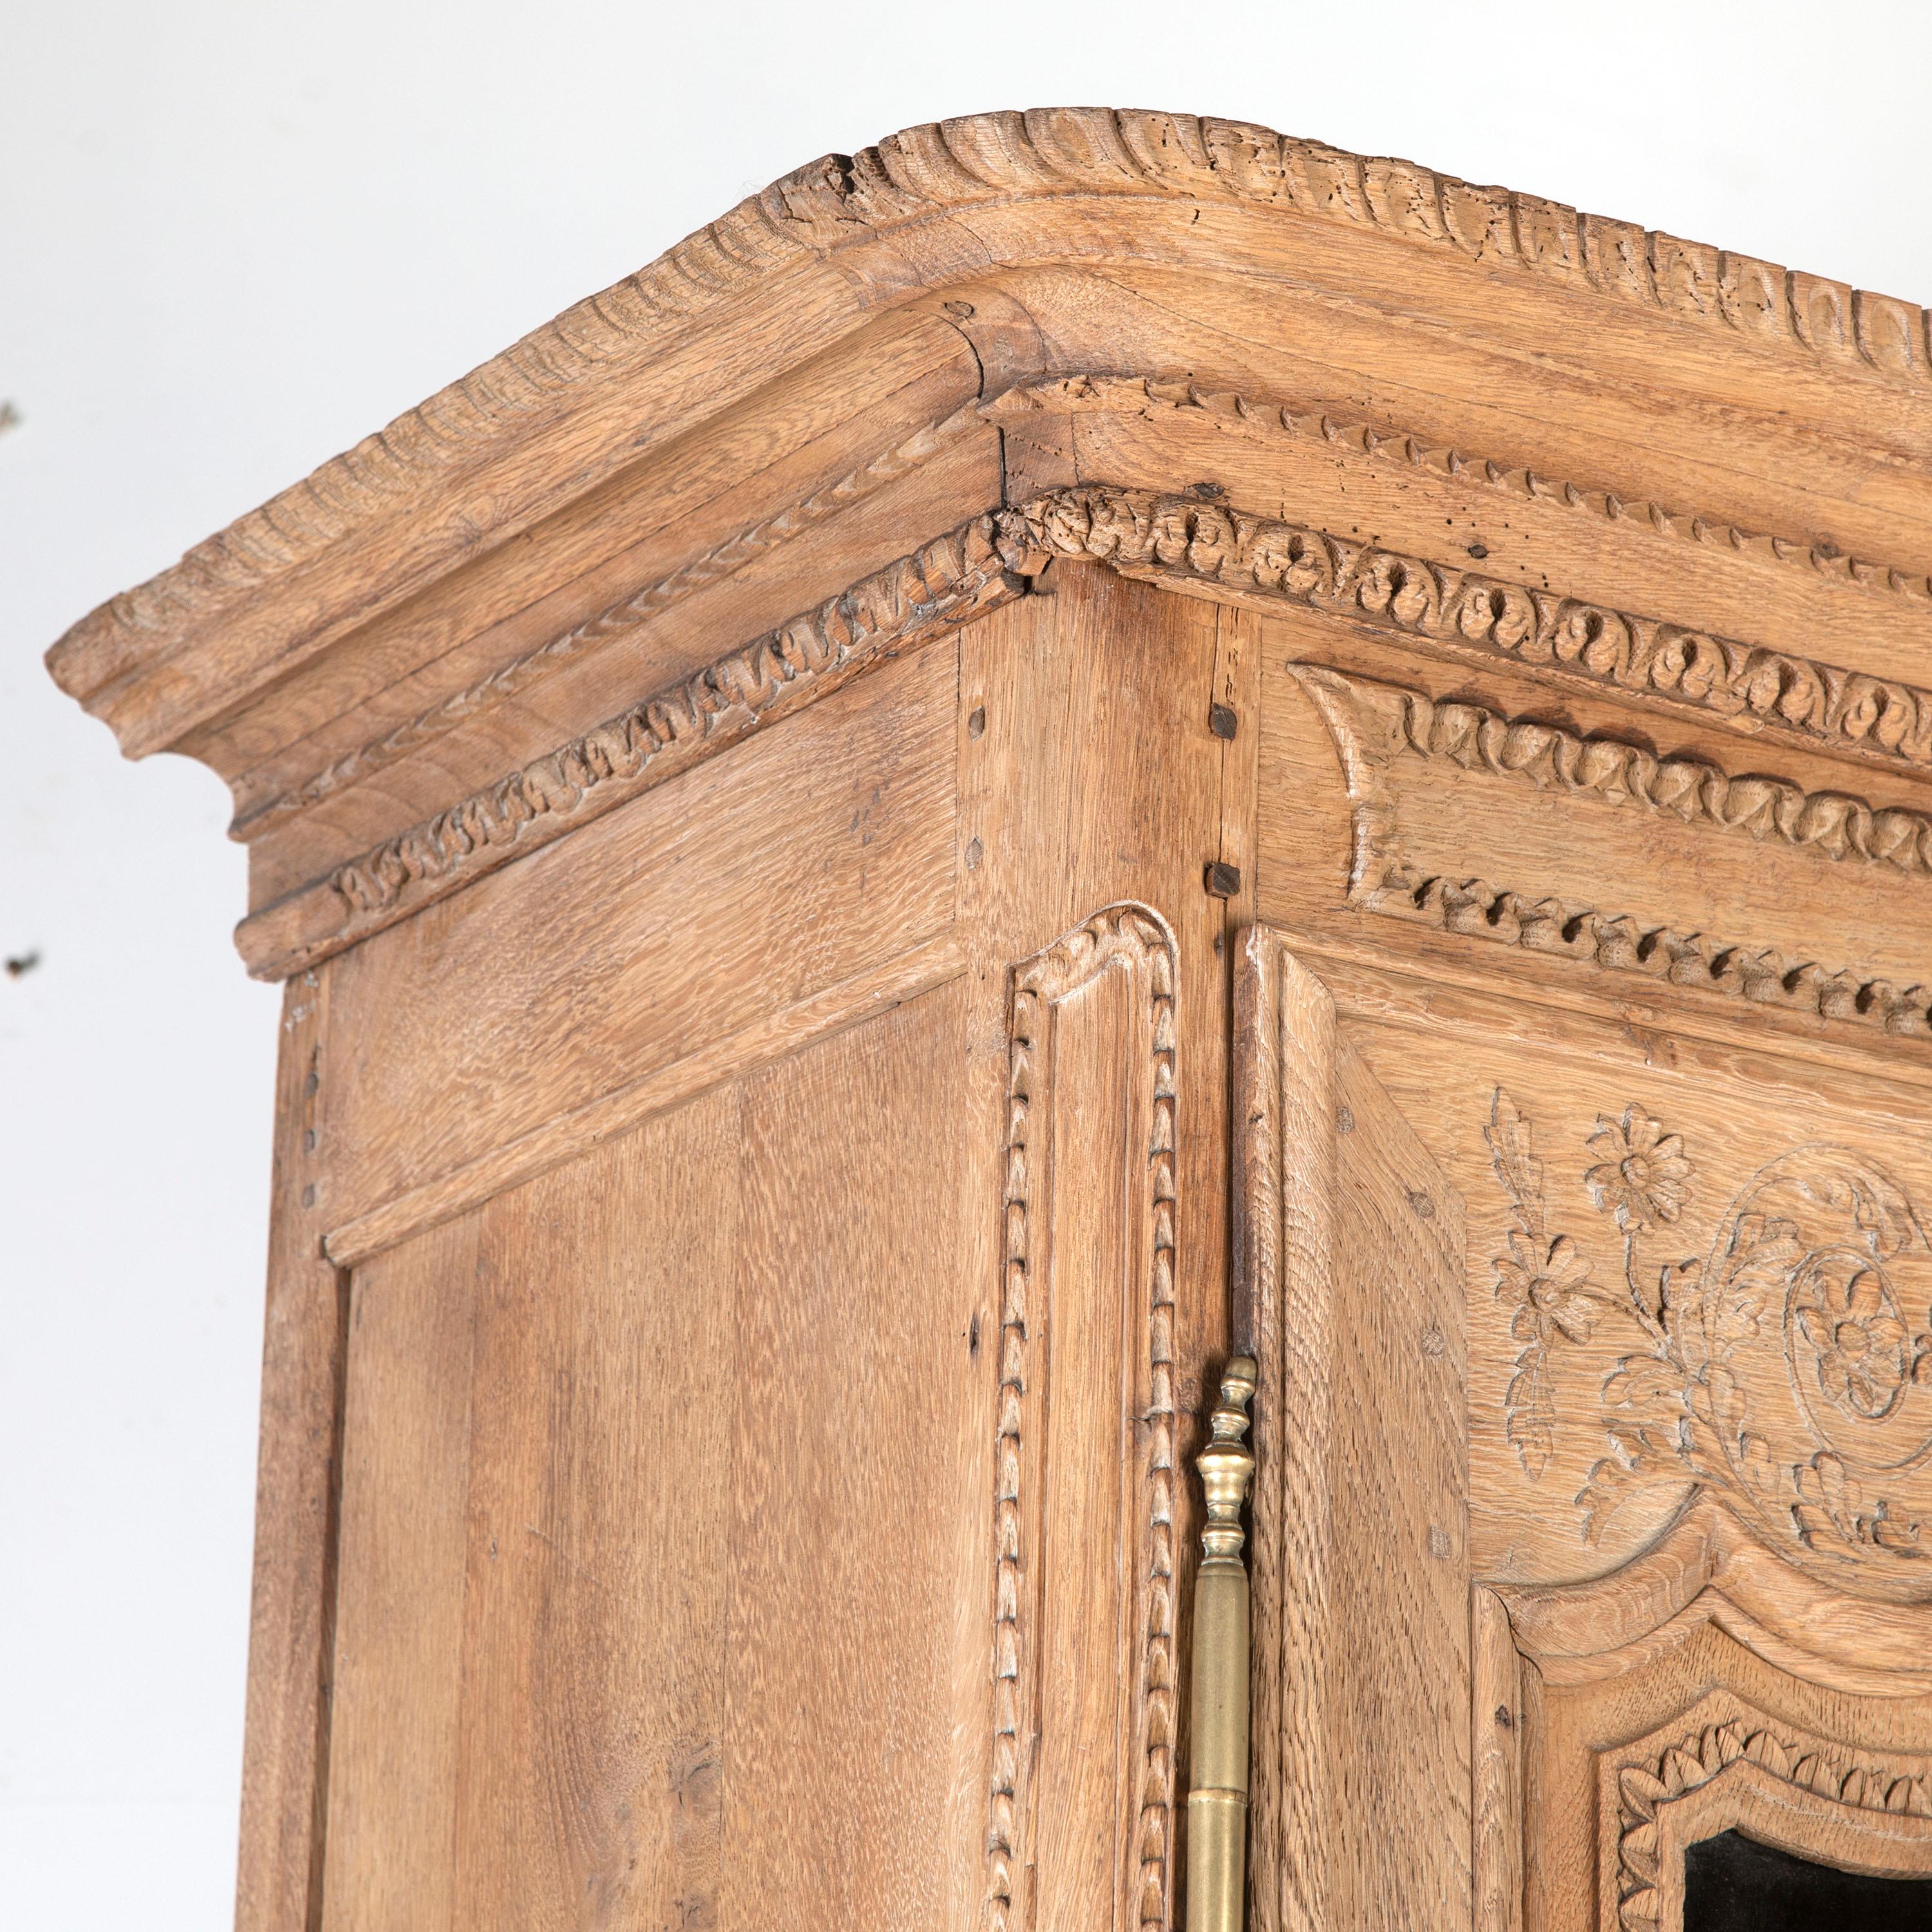 Fine early 19th Century two-part buffet from Normandy.

This piece is beautifully hand-carved and is composed of bleached oak. 

The glazed top section features three internal shelves, a single shelf in the base, and its original brass fittings